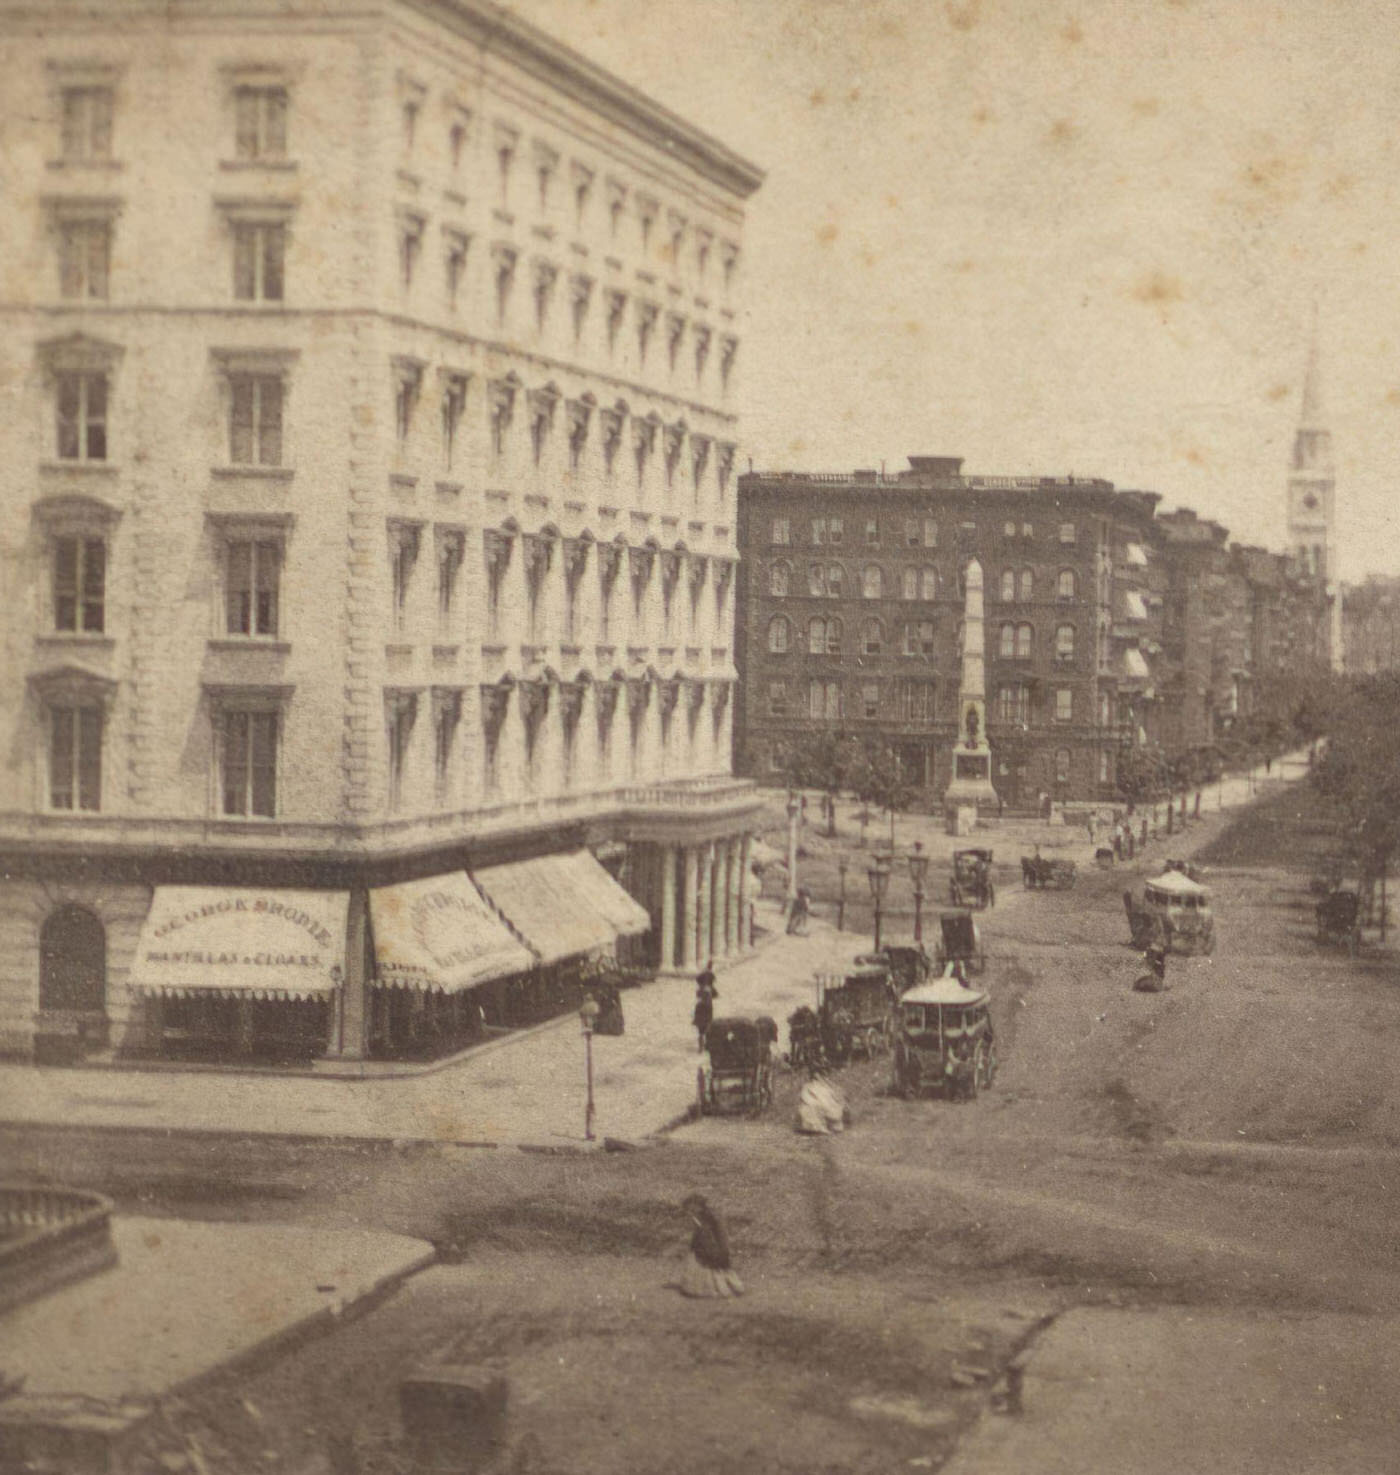 The Fifth Avenue Hotel And The Worth Monument From The Balcony Of St. Germains, Manhattan, New York City, 1890S